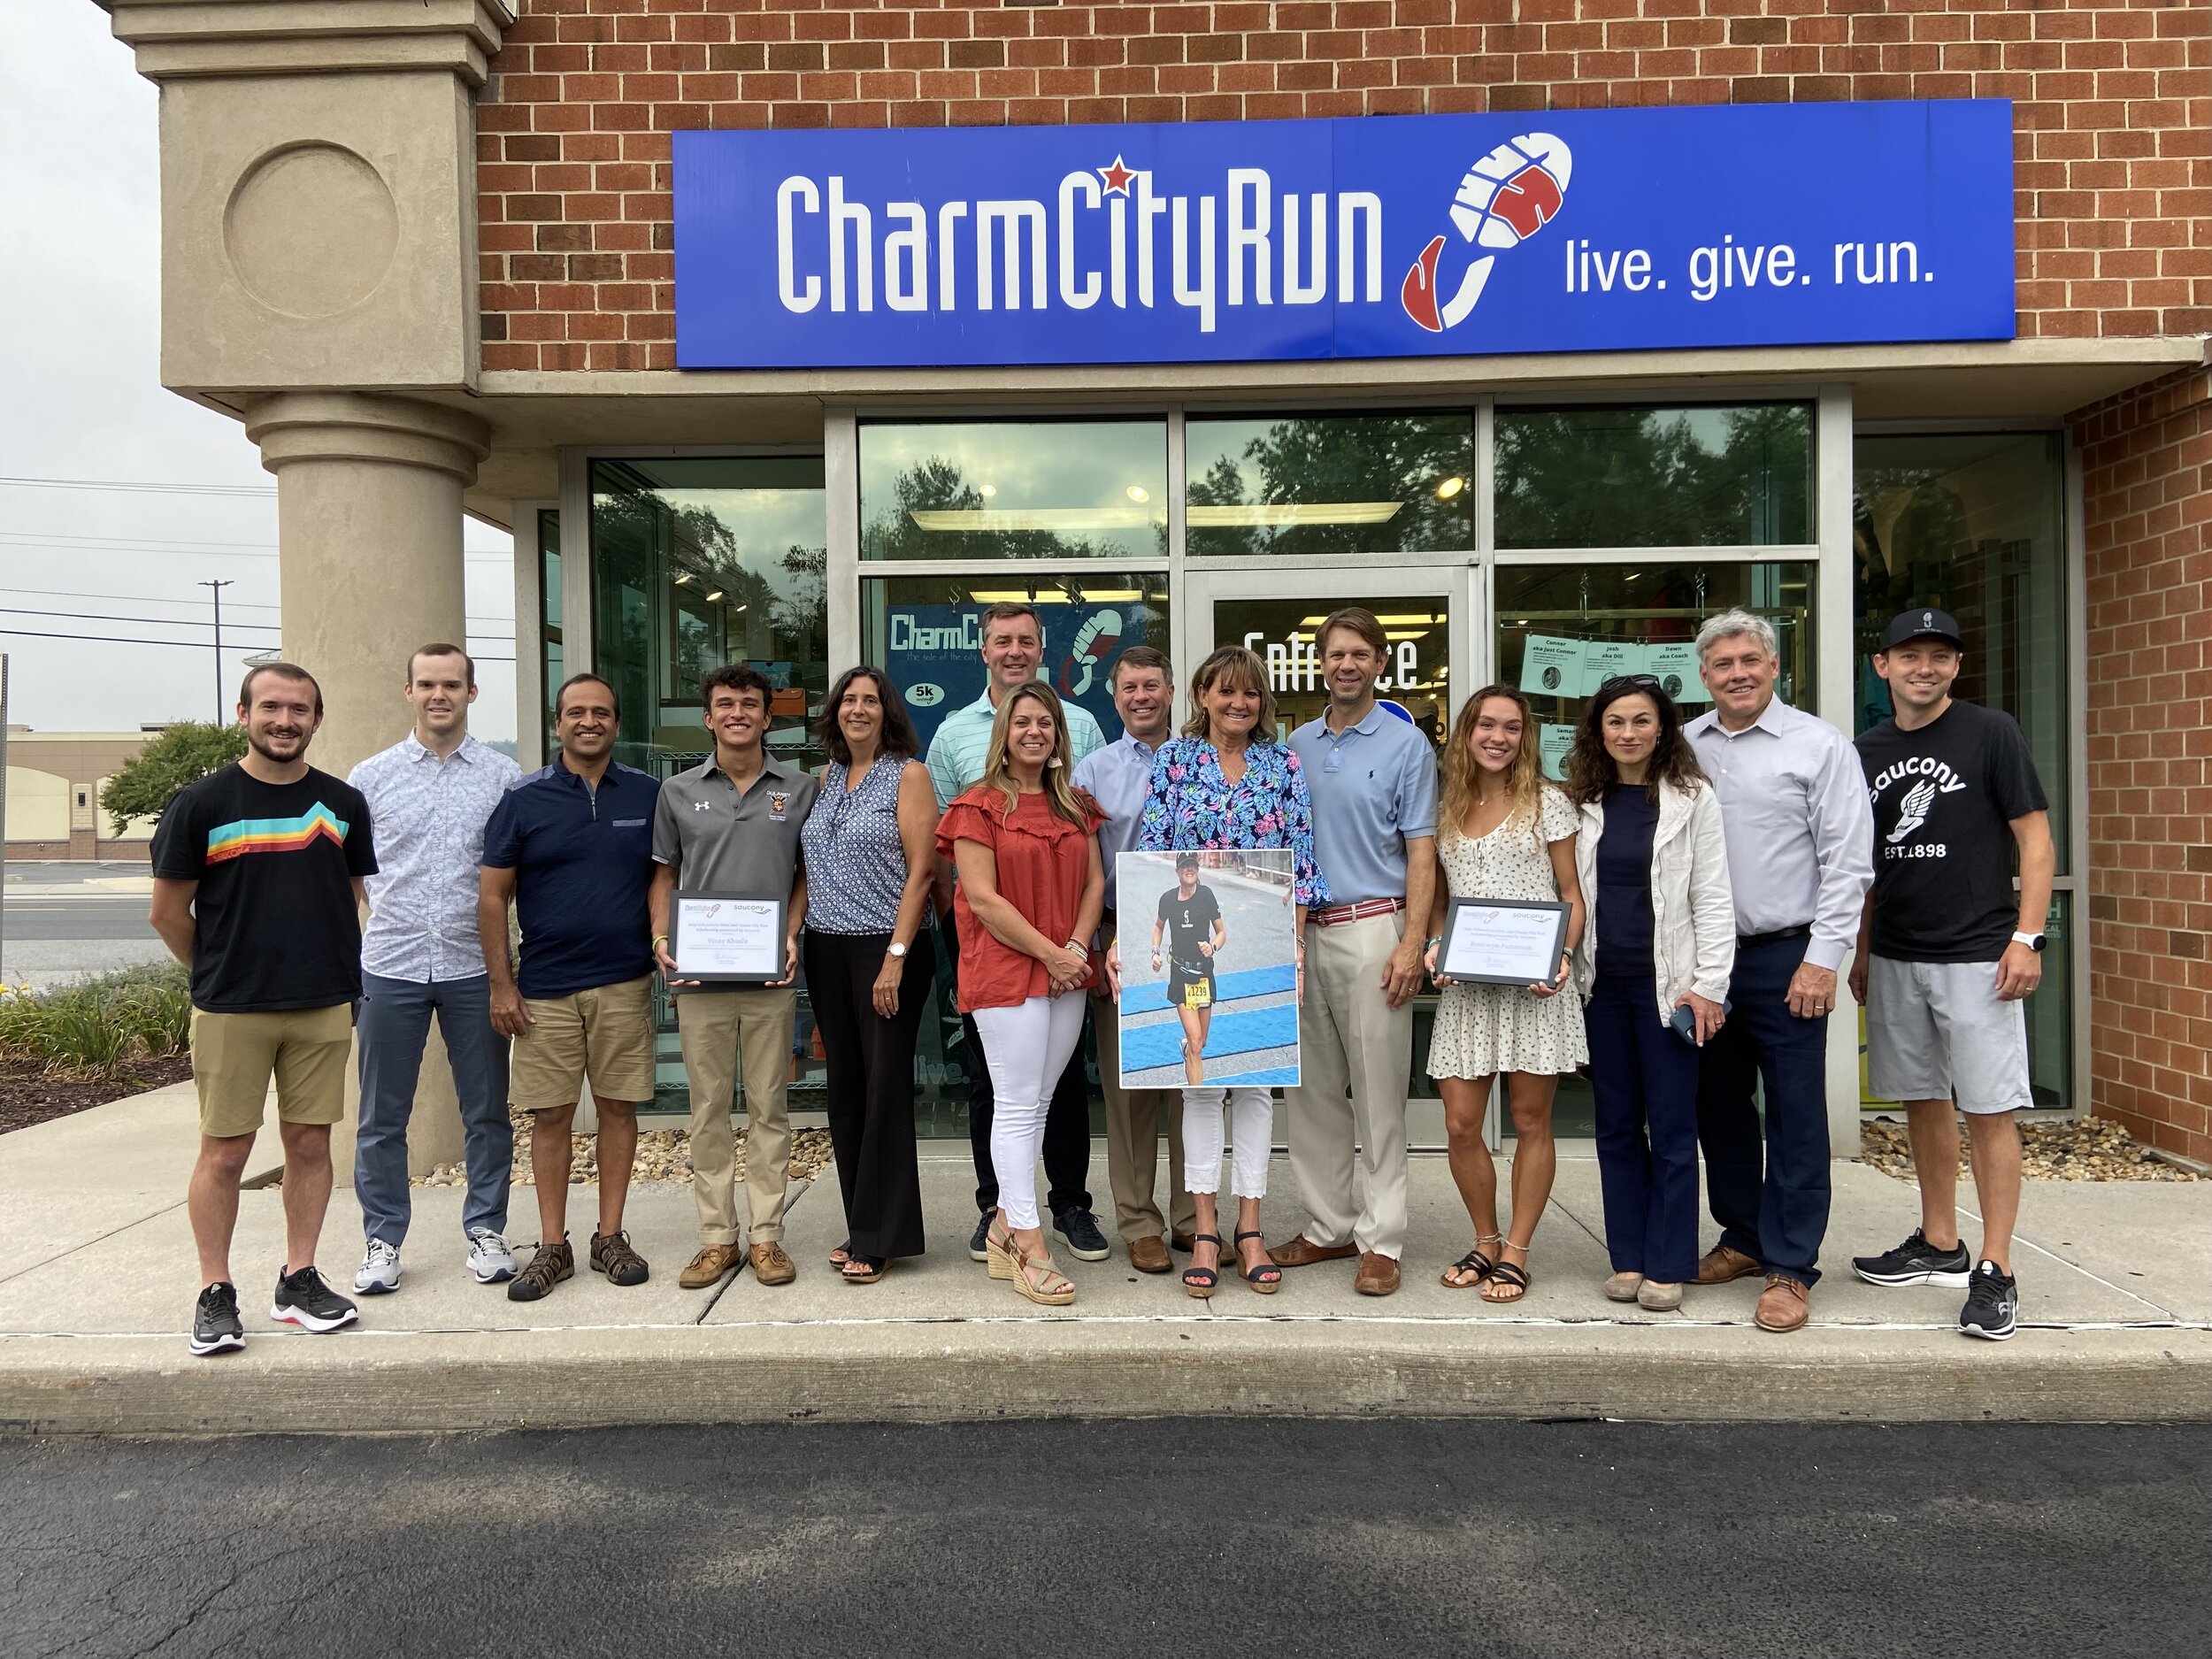 2021 Scholarship Winners Vinay Khosla and Bronwyn Patterson alongside their families, Amy Amy Schuerholtz Metz’s family, Saucony representatives Zach Opdenaker and Ken Holmes, and Charm City Run COO Tom Mansfield